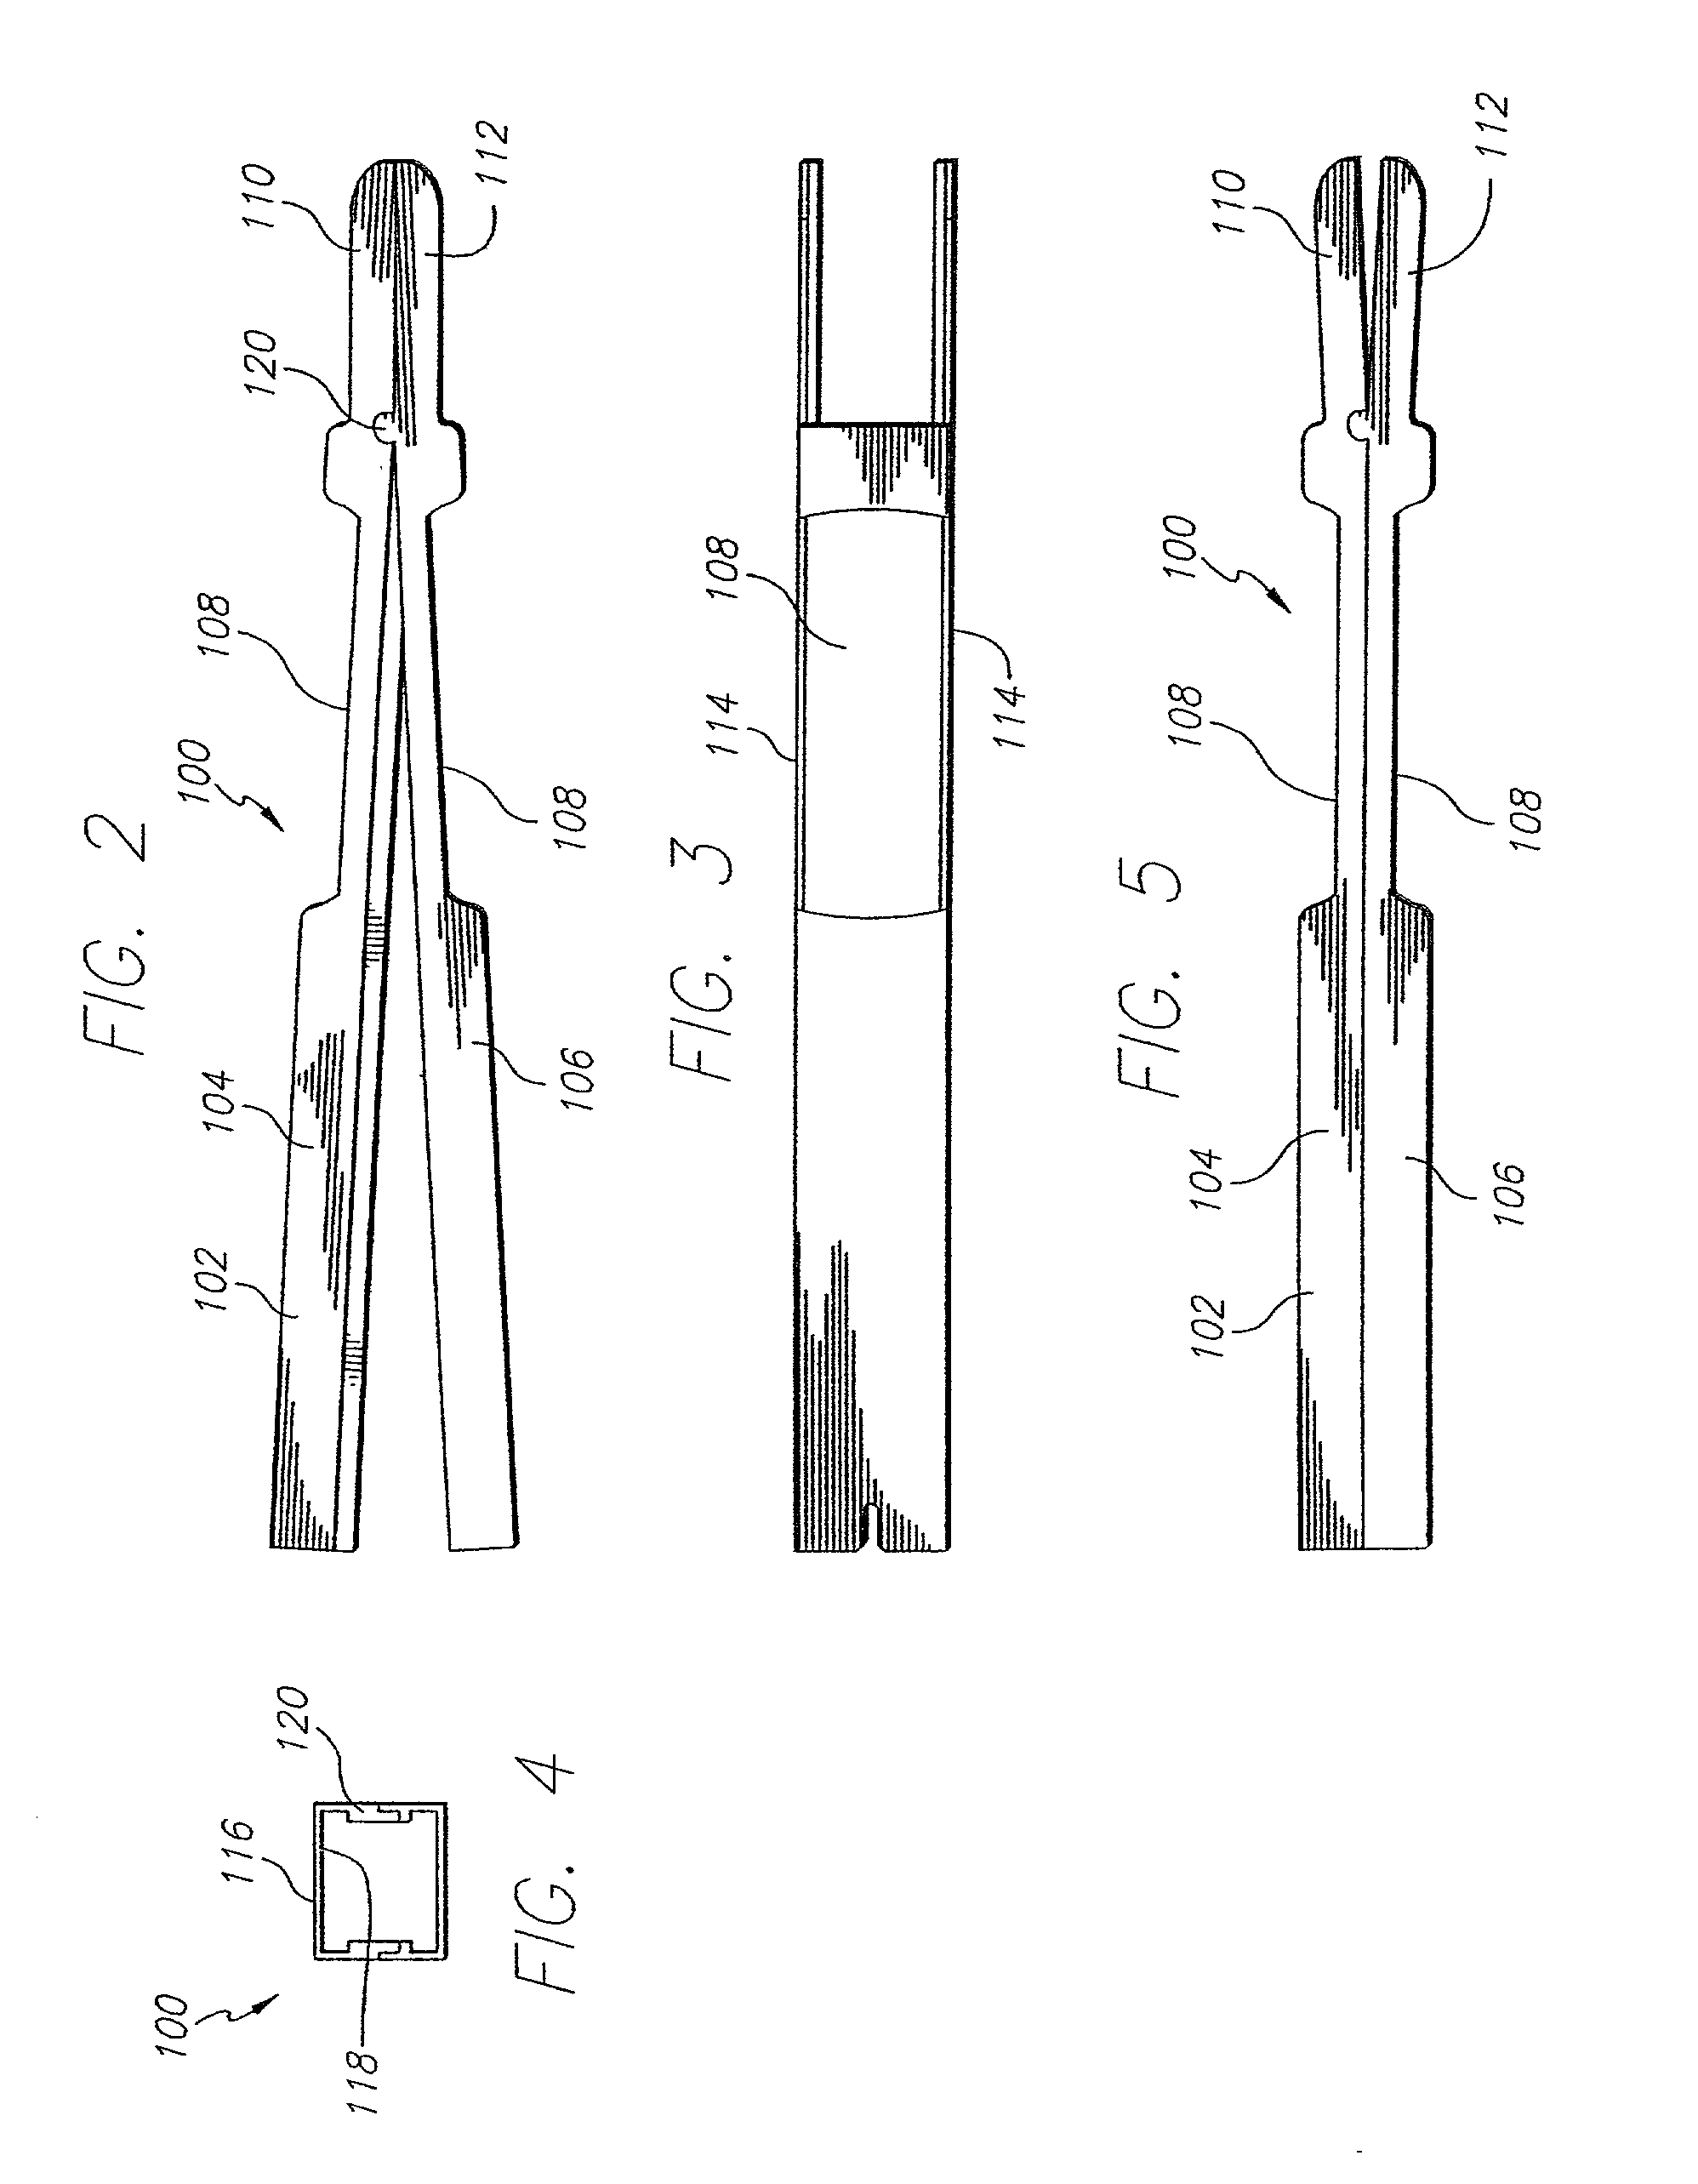 Dynamic lordotic guard with movable extensions for creating an implantation space posteriorly in the lumbar spine and method for use thereof